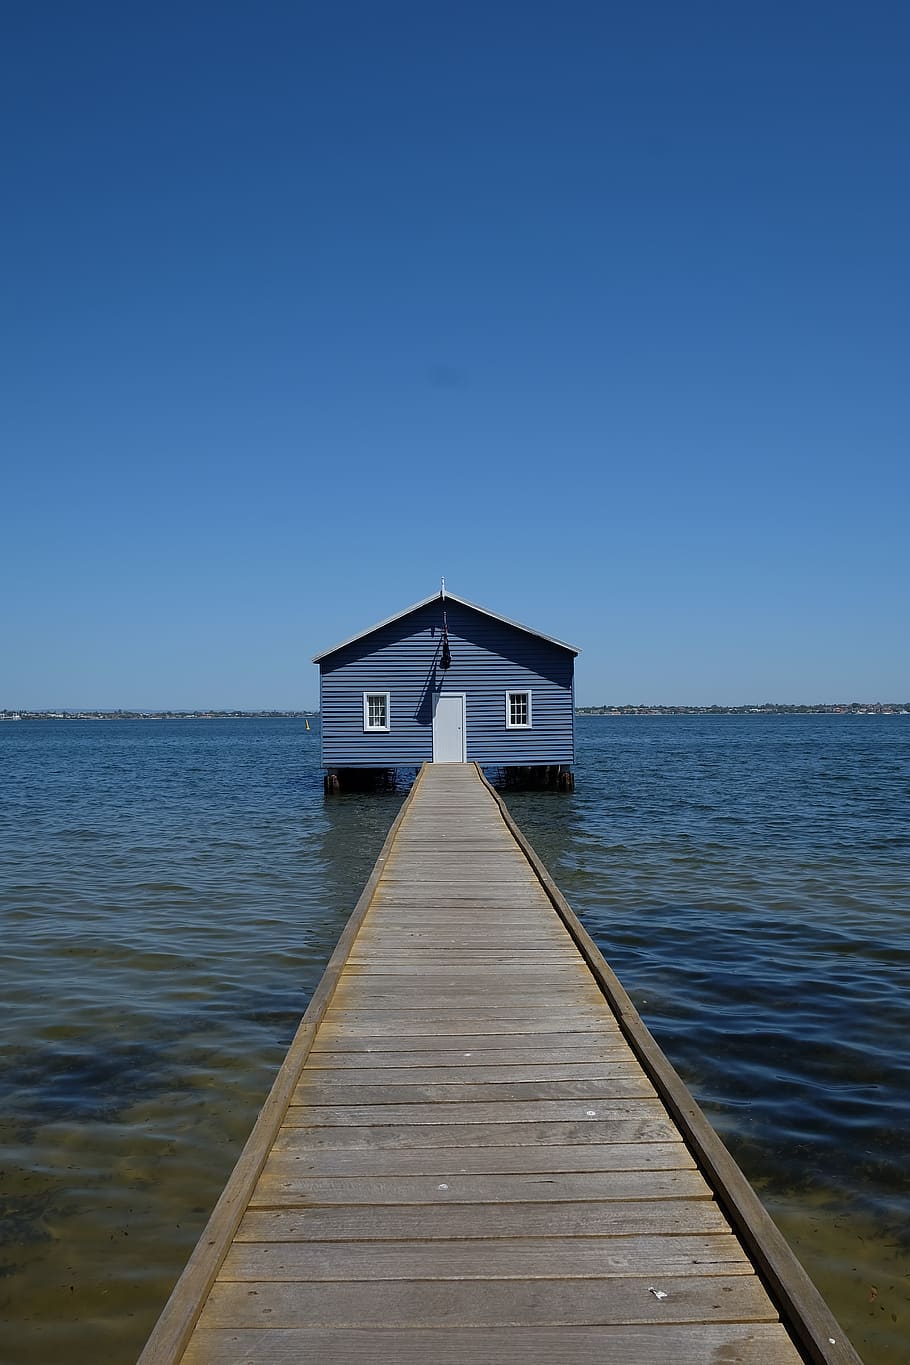 perth, boat house, blue boat house, water, sky, crawley edge, travel, portrait, architecture, built structure